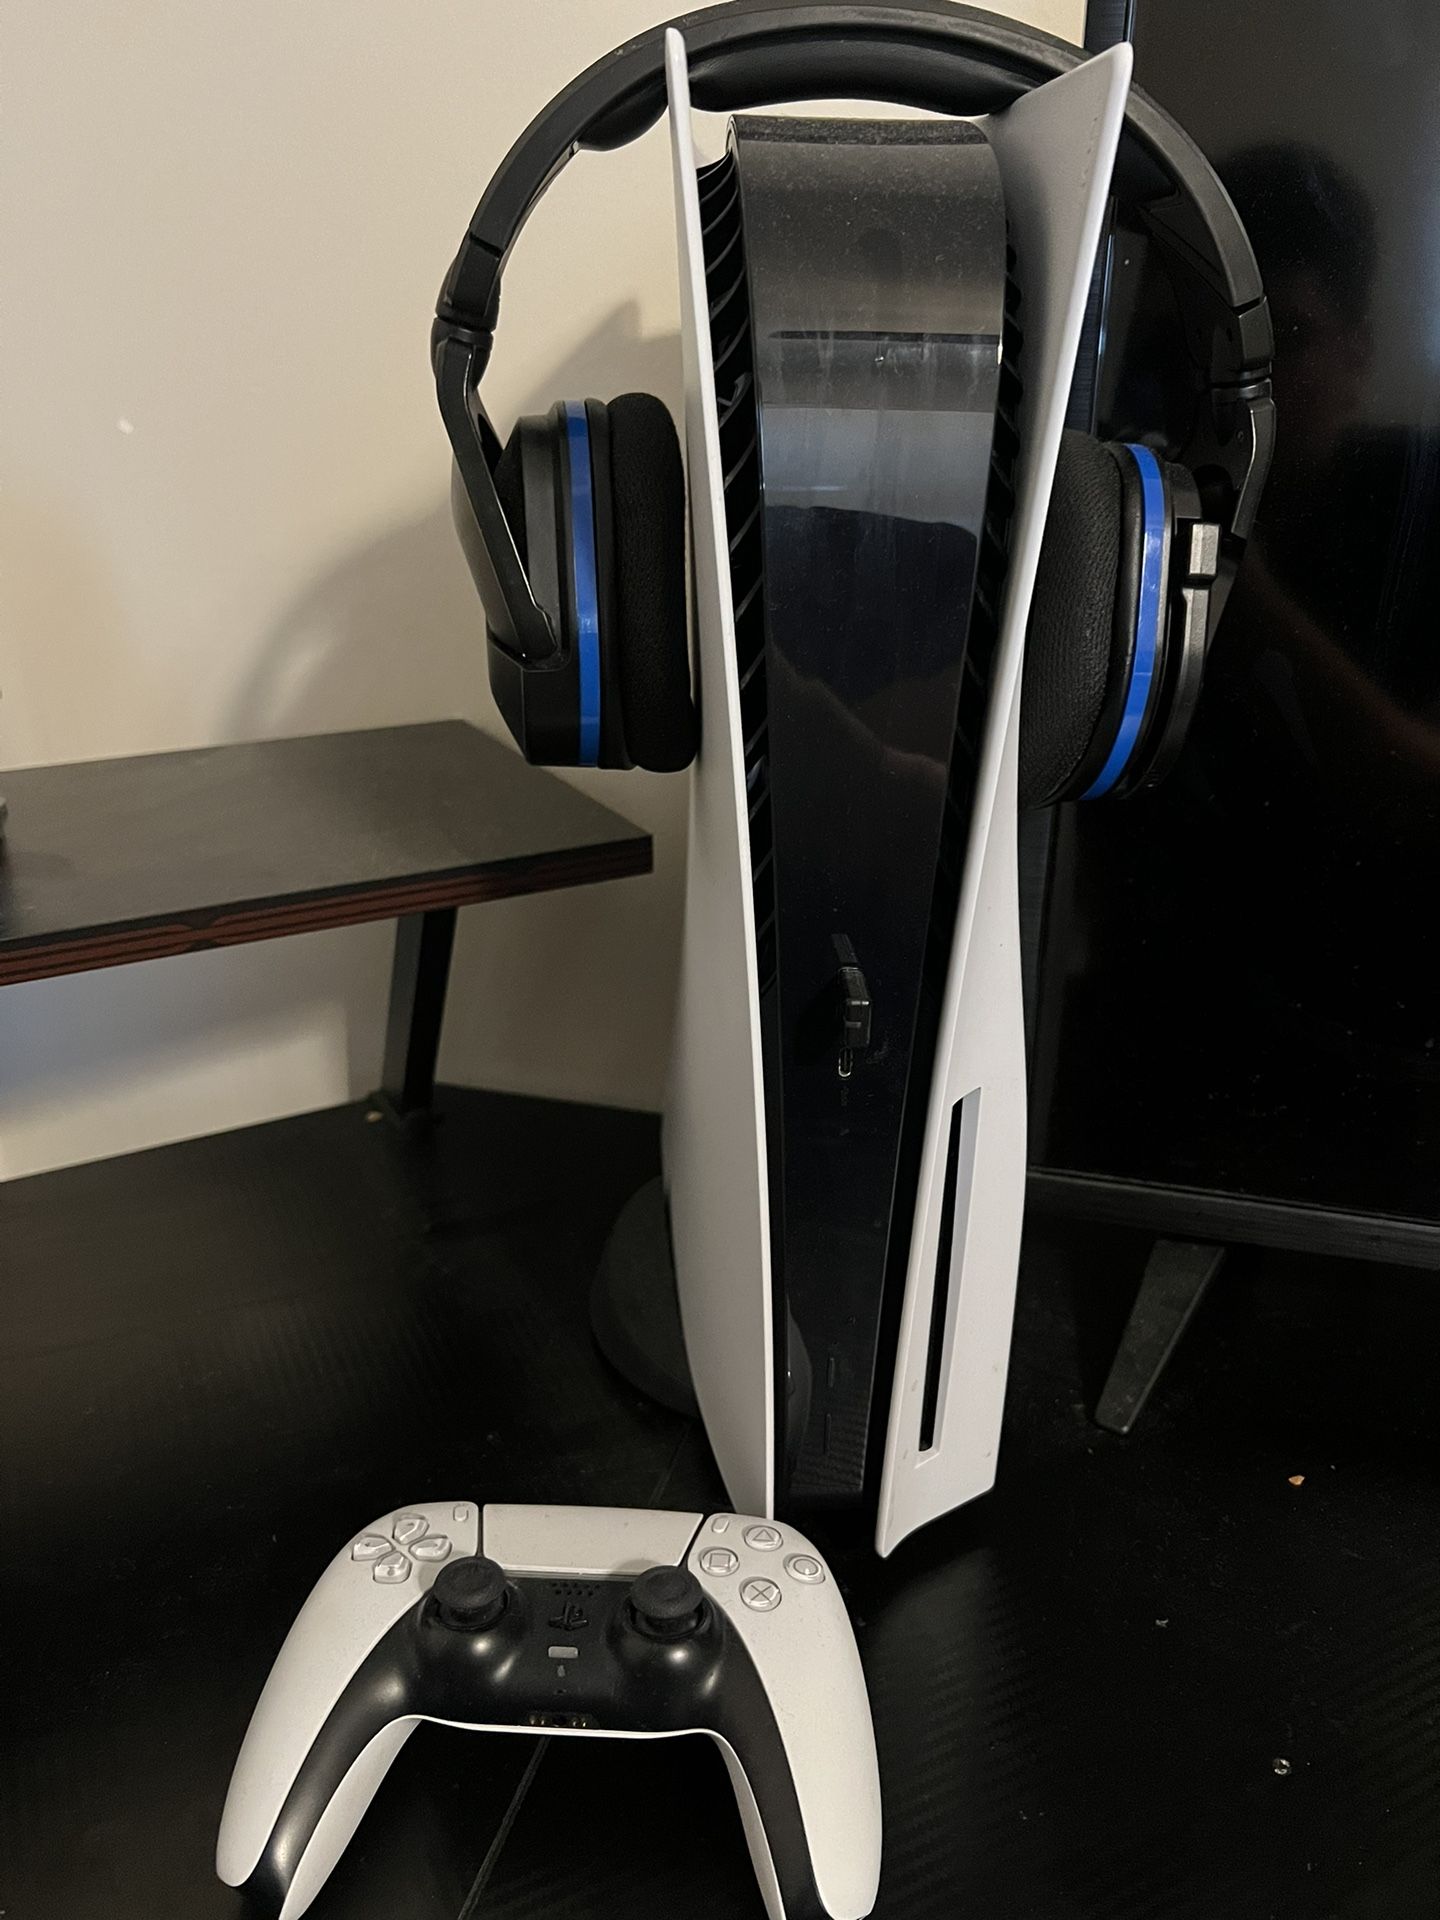 PS5 with Turtle Beaches